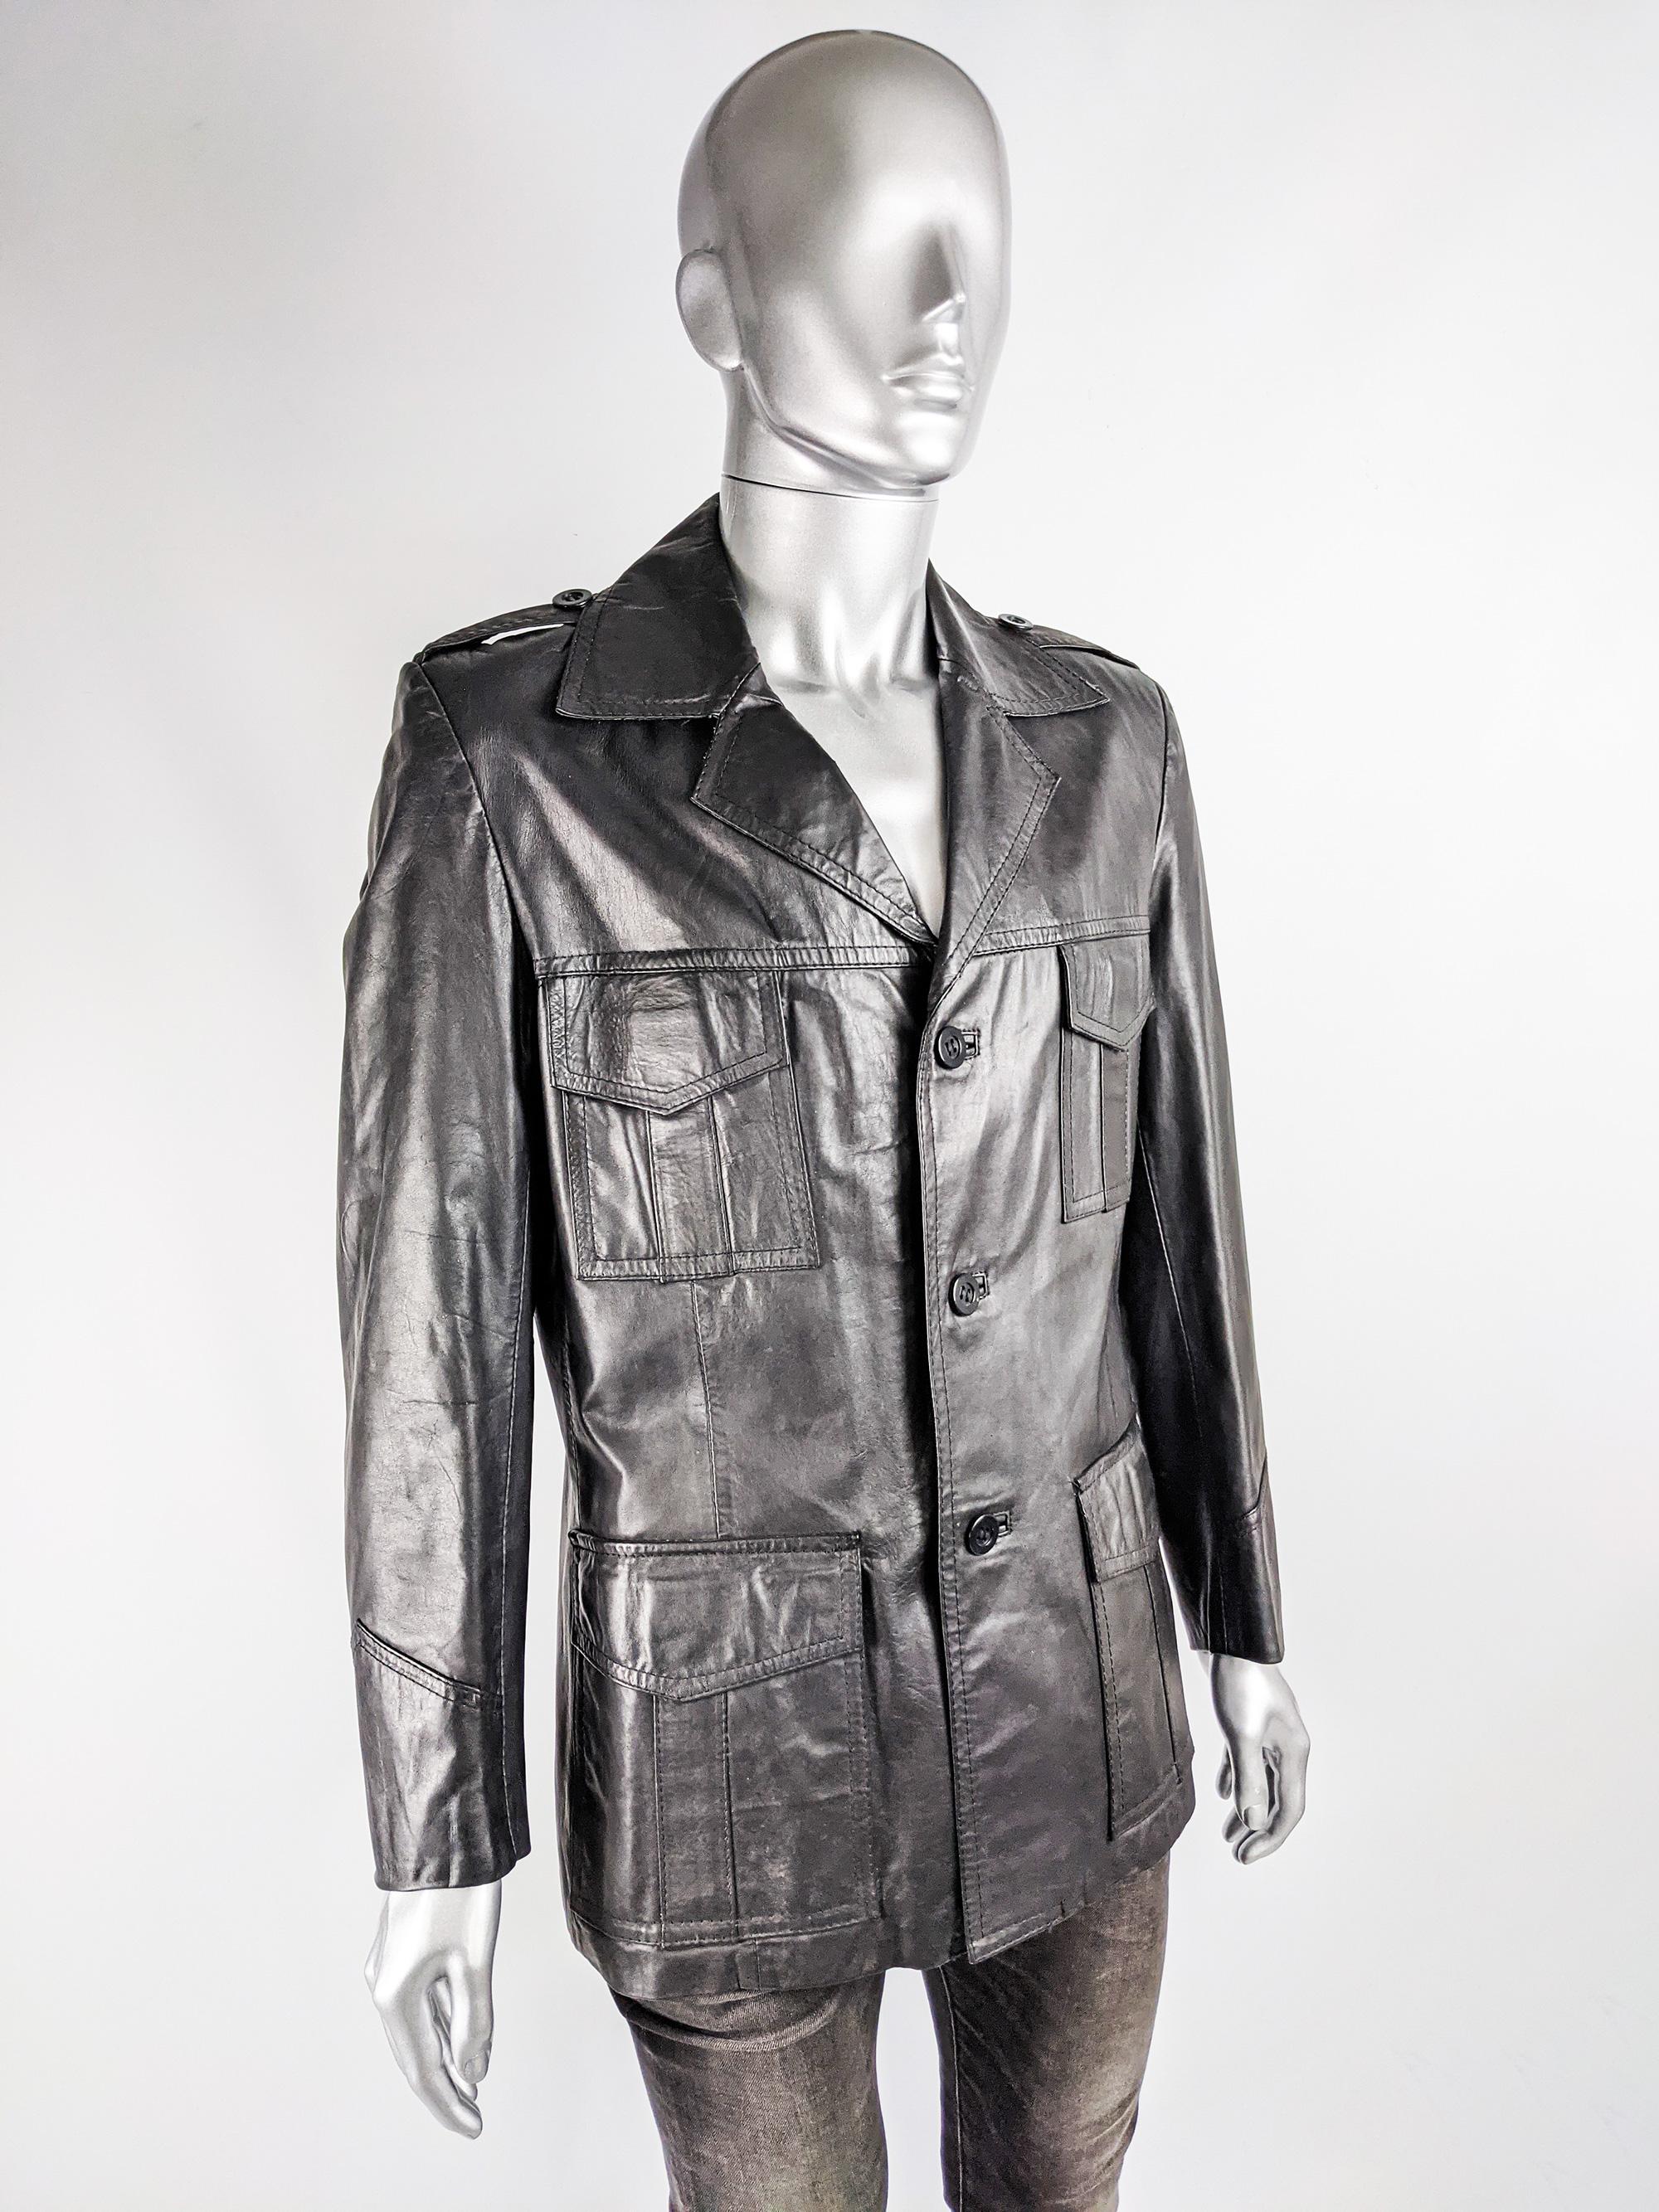 A stylish vintage mens leather jacket from the 70s by quality British label, Toff of London. In a black leather with pleated flap patch pockets, epaulettes and a spread collar. 

Size: Marked UK 40